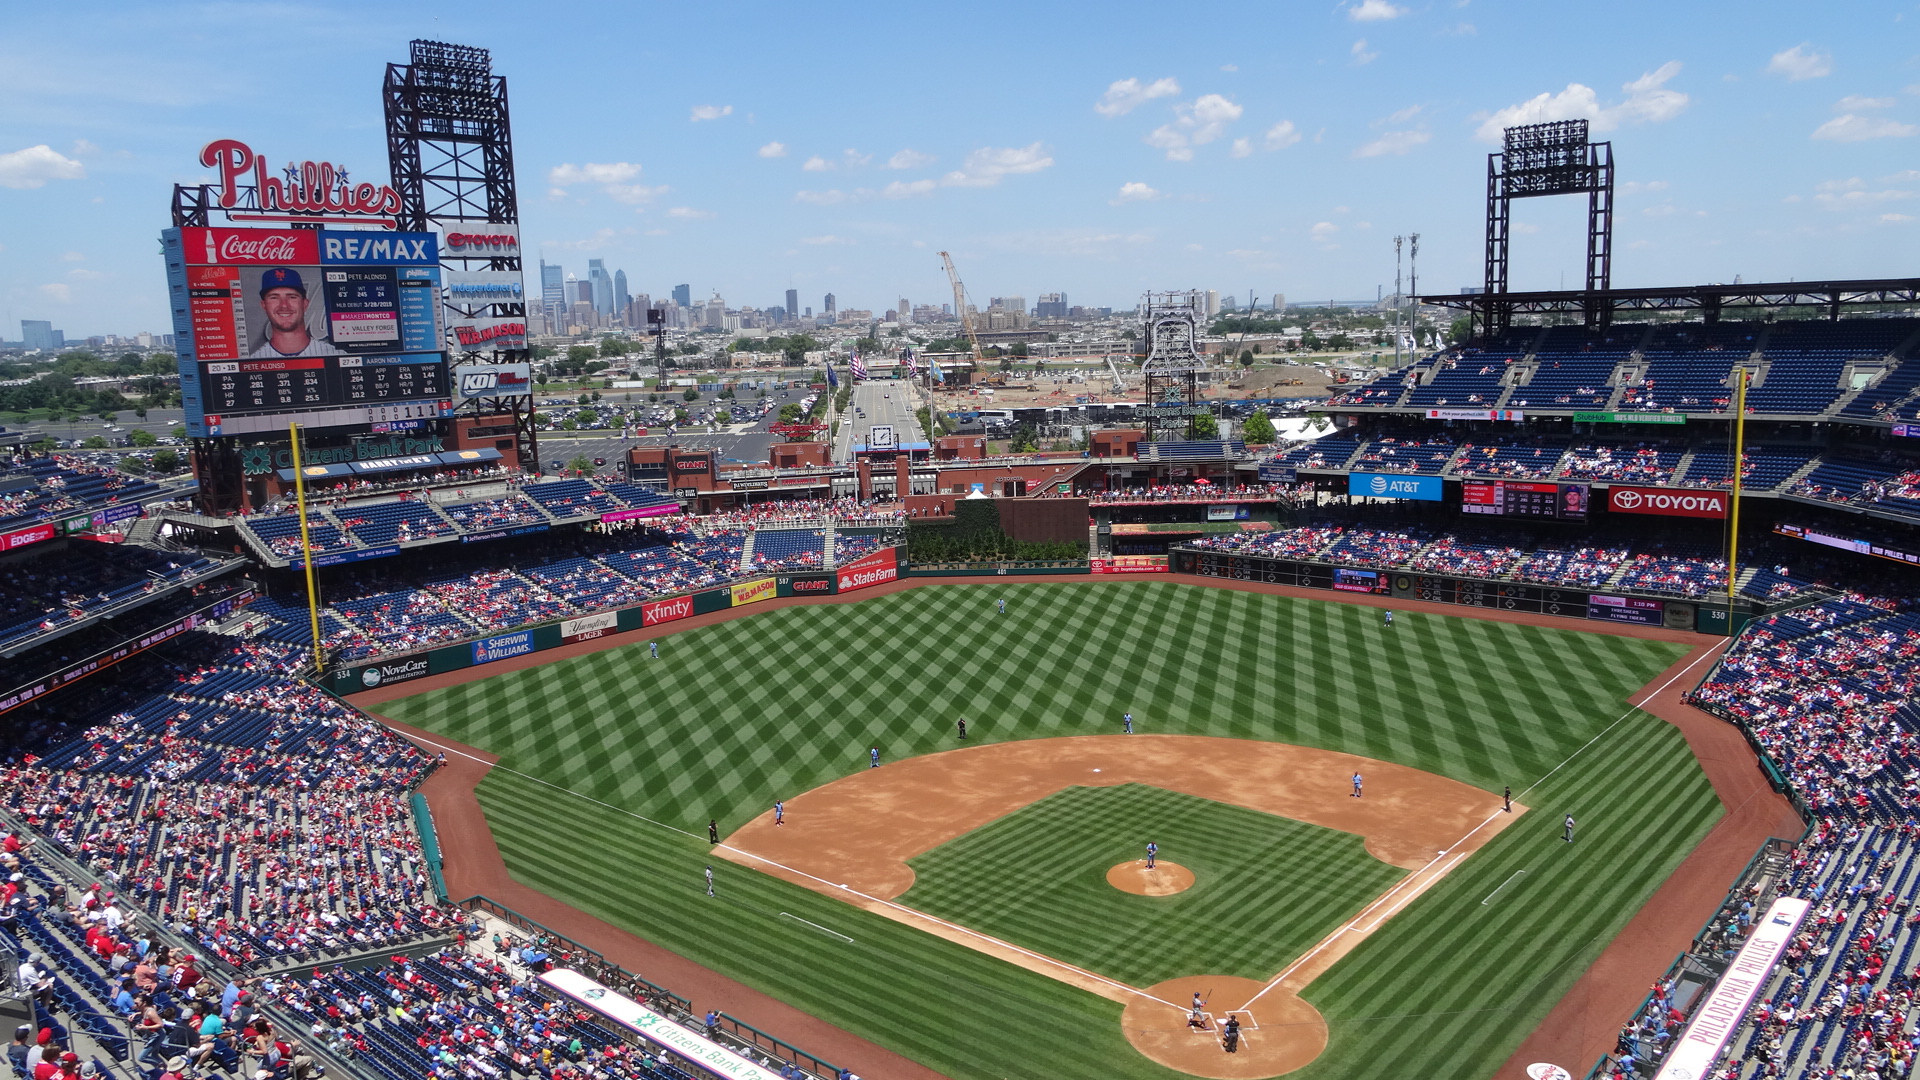 PIFBS 2018 Community Day At The Phillies